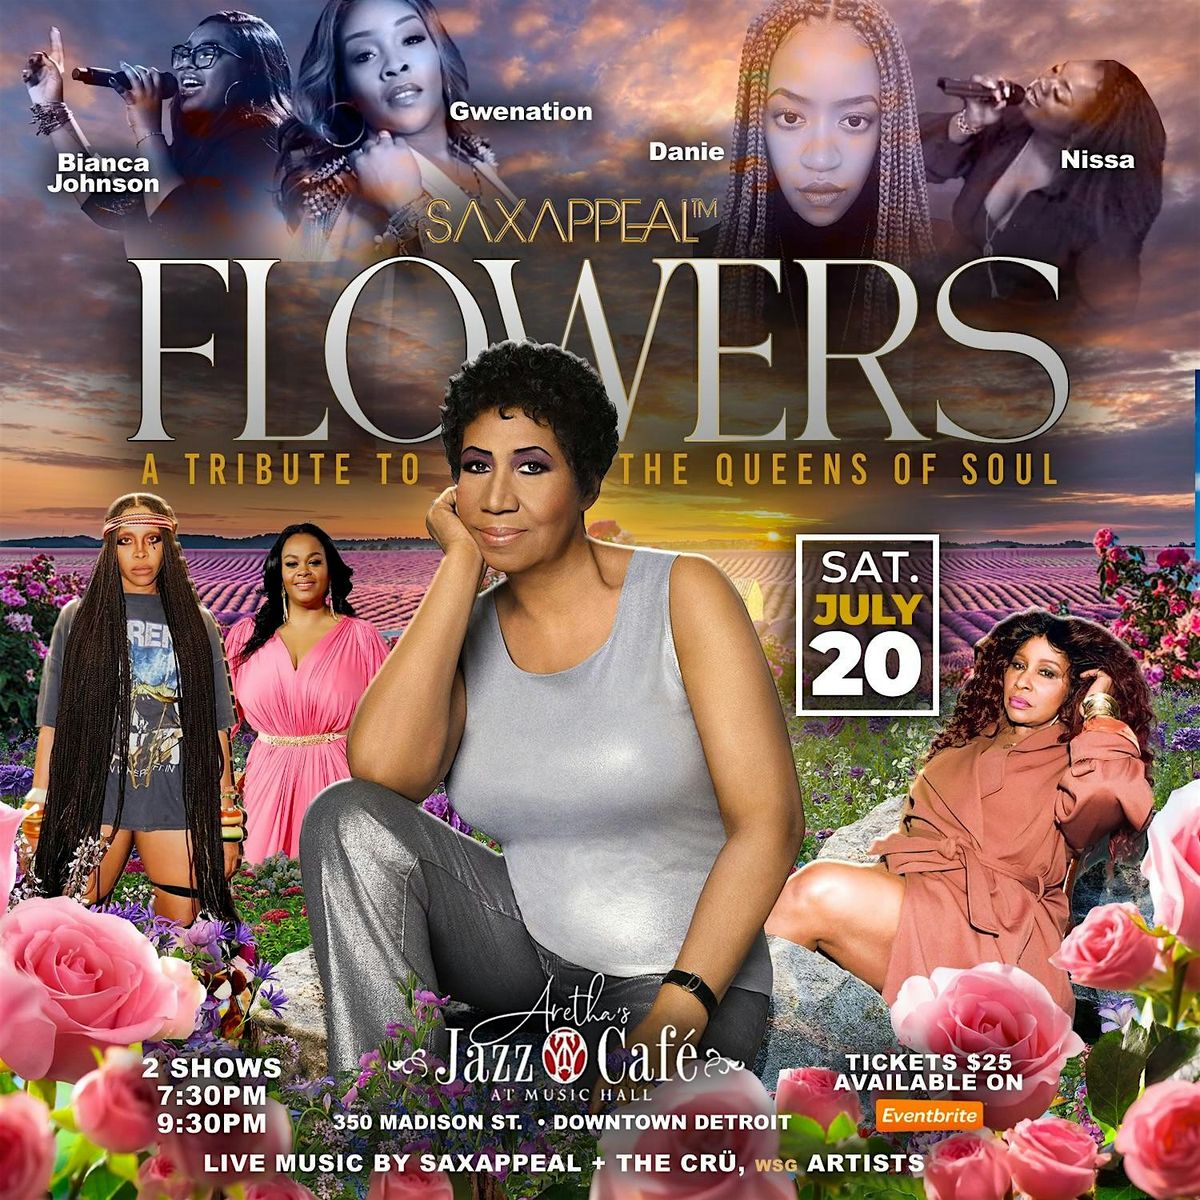 FLOWERS: a Tribute to The Queens of Soul (7:30pm show)